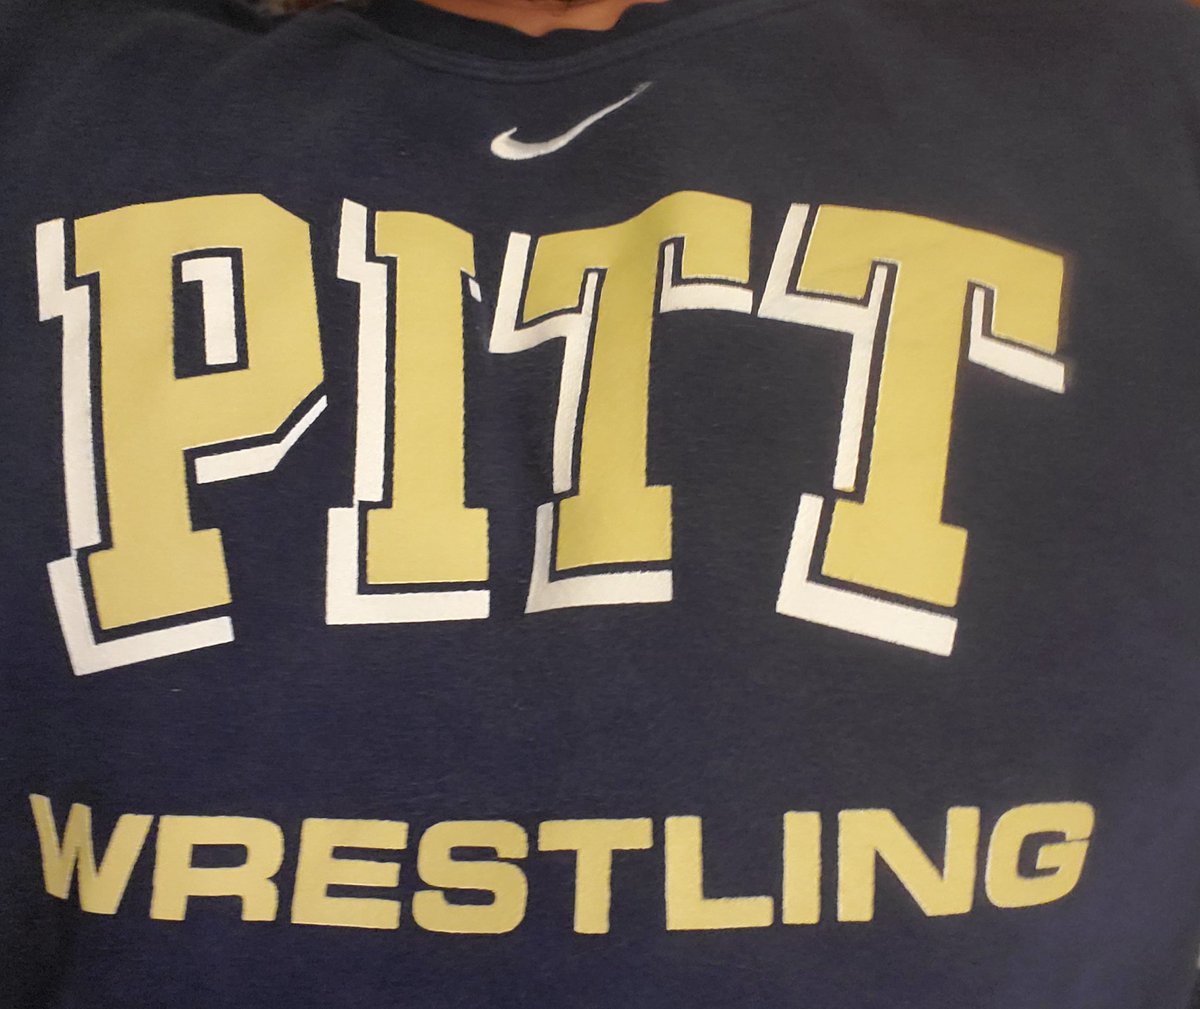 #WrestlingShirtADayinMay Day 26

Calling it a night with the crew from @Pitt_WRES . Gotta rest up,  apparently we've got a big day ahead of us tomorrow.